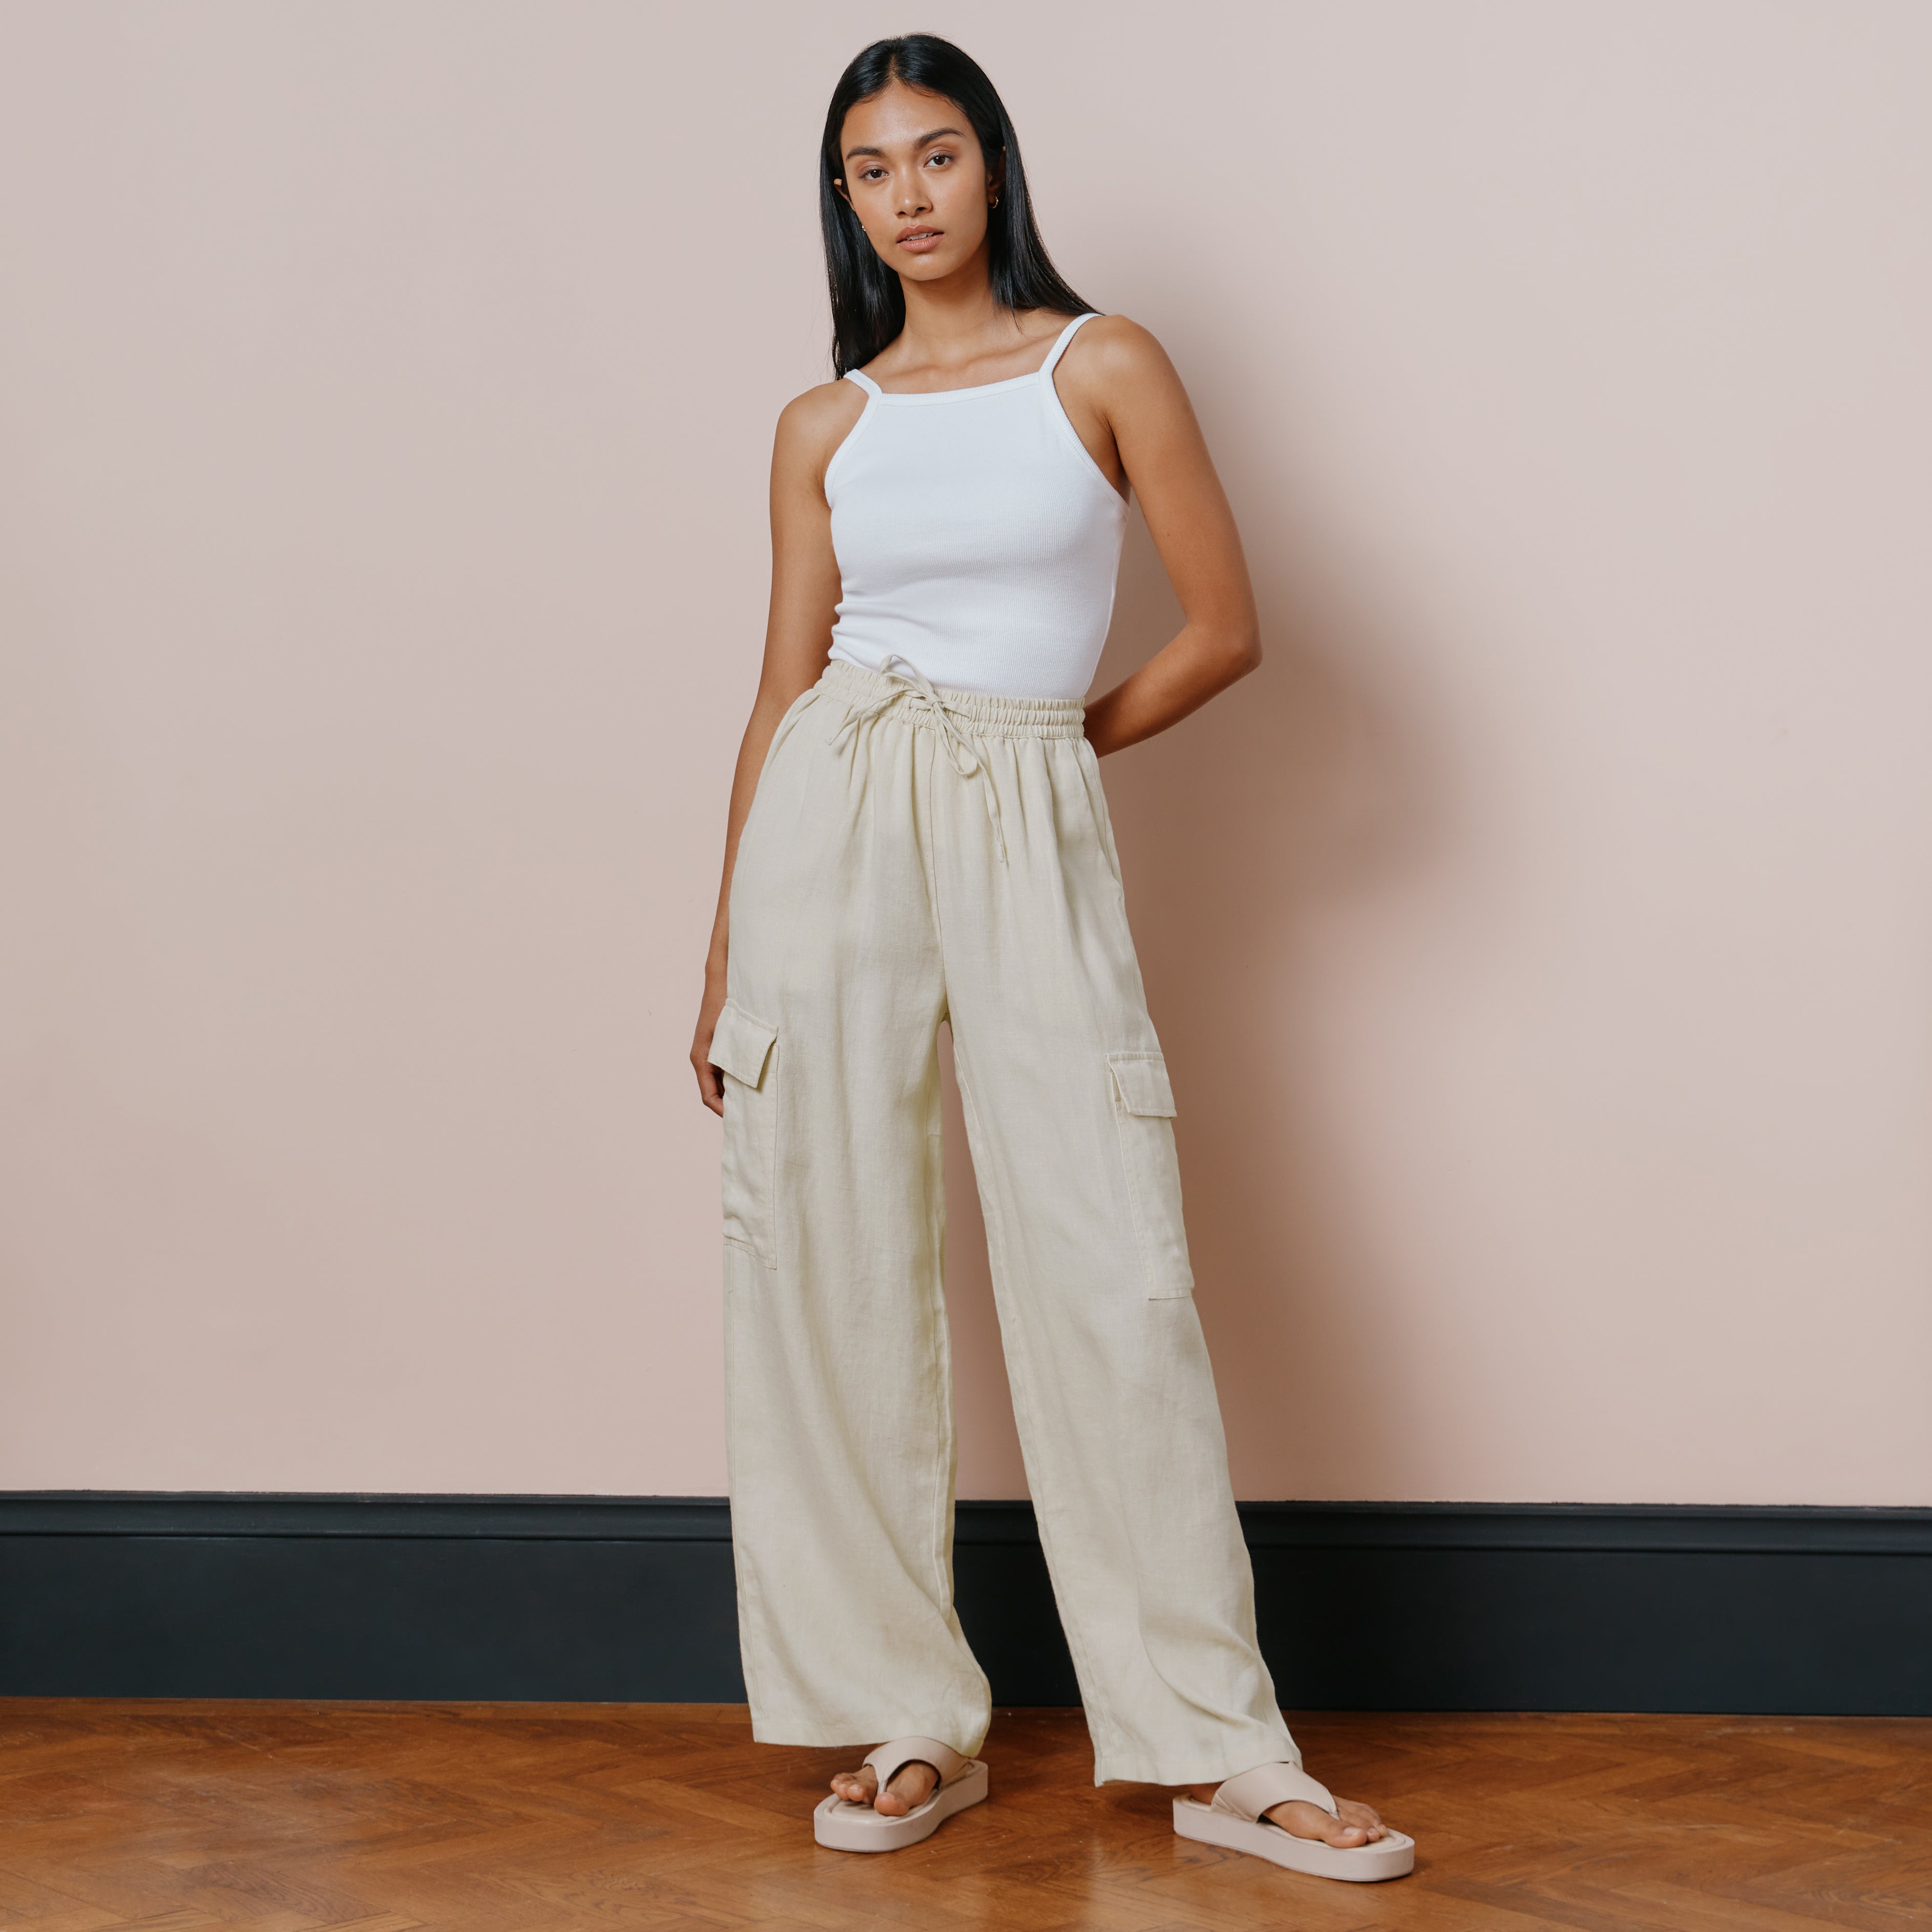 Buy Famulily Summer Cotton Linen Trousers for Women UK Elastic High Waist Drawstring  Pants Comfy Wide Leg Loose Fit Trousers with Pockets, White, XL at Amazon.in